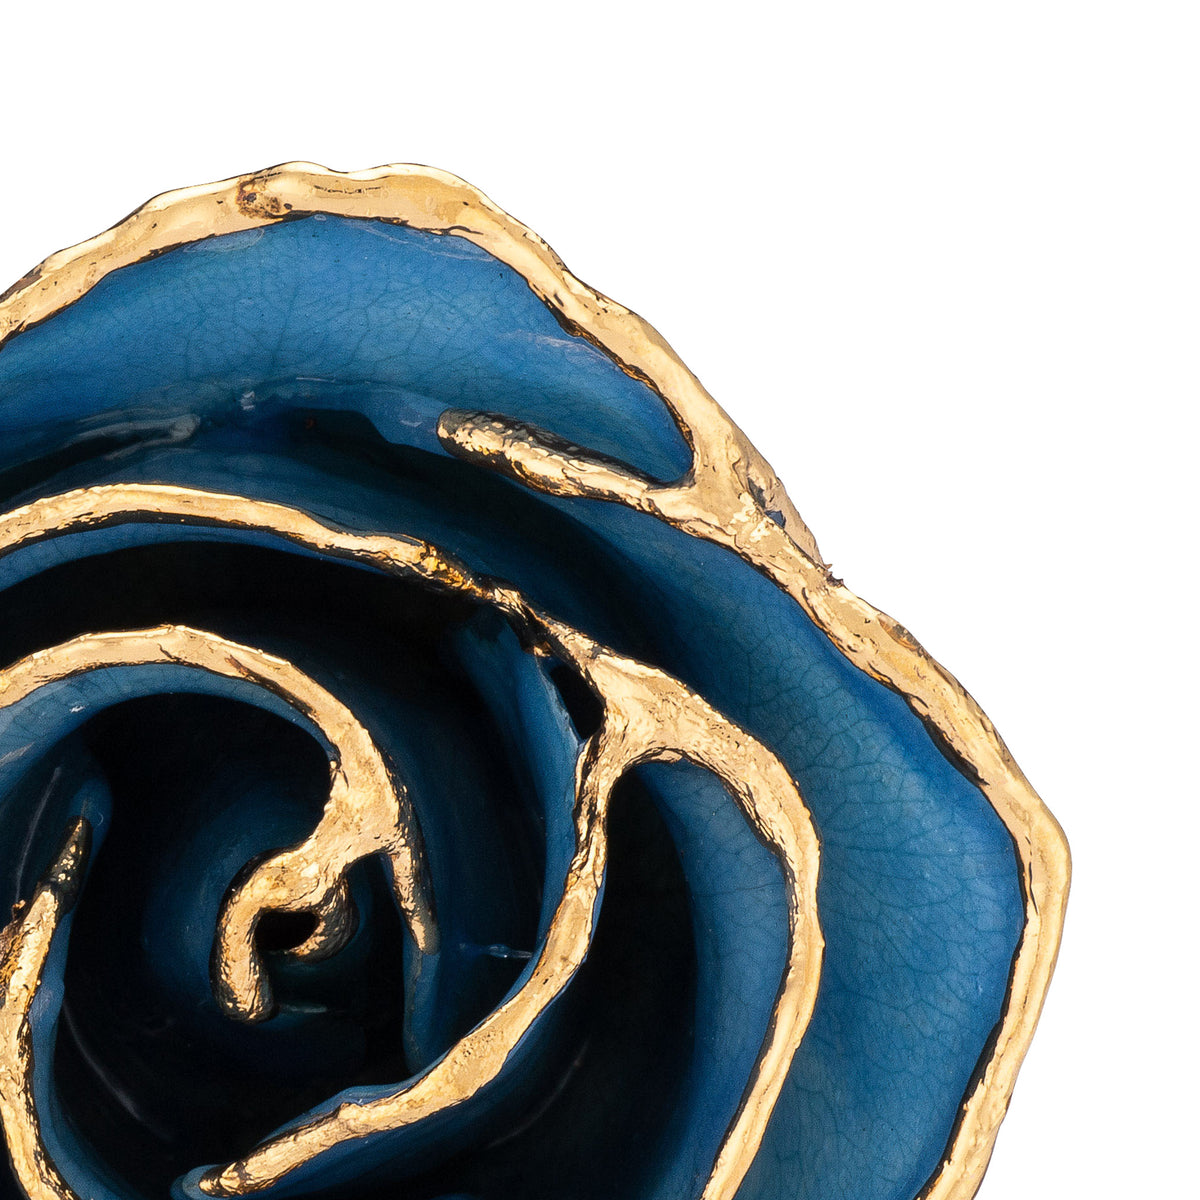 24K Gold Trimmed Forever Rose with Blue Petals with Zoom View of Rose Petals and Showing Detail of Gold Trim